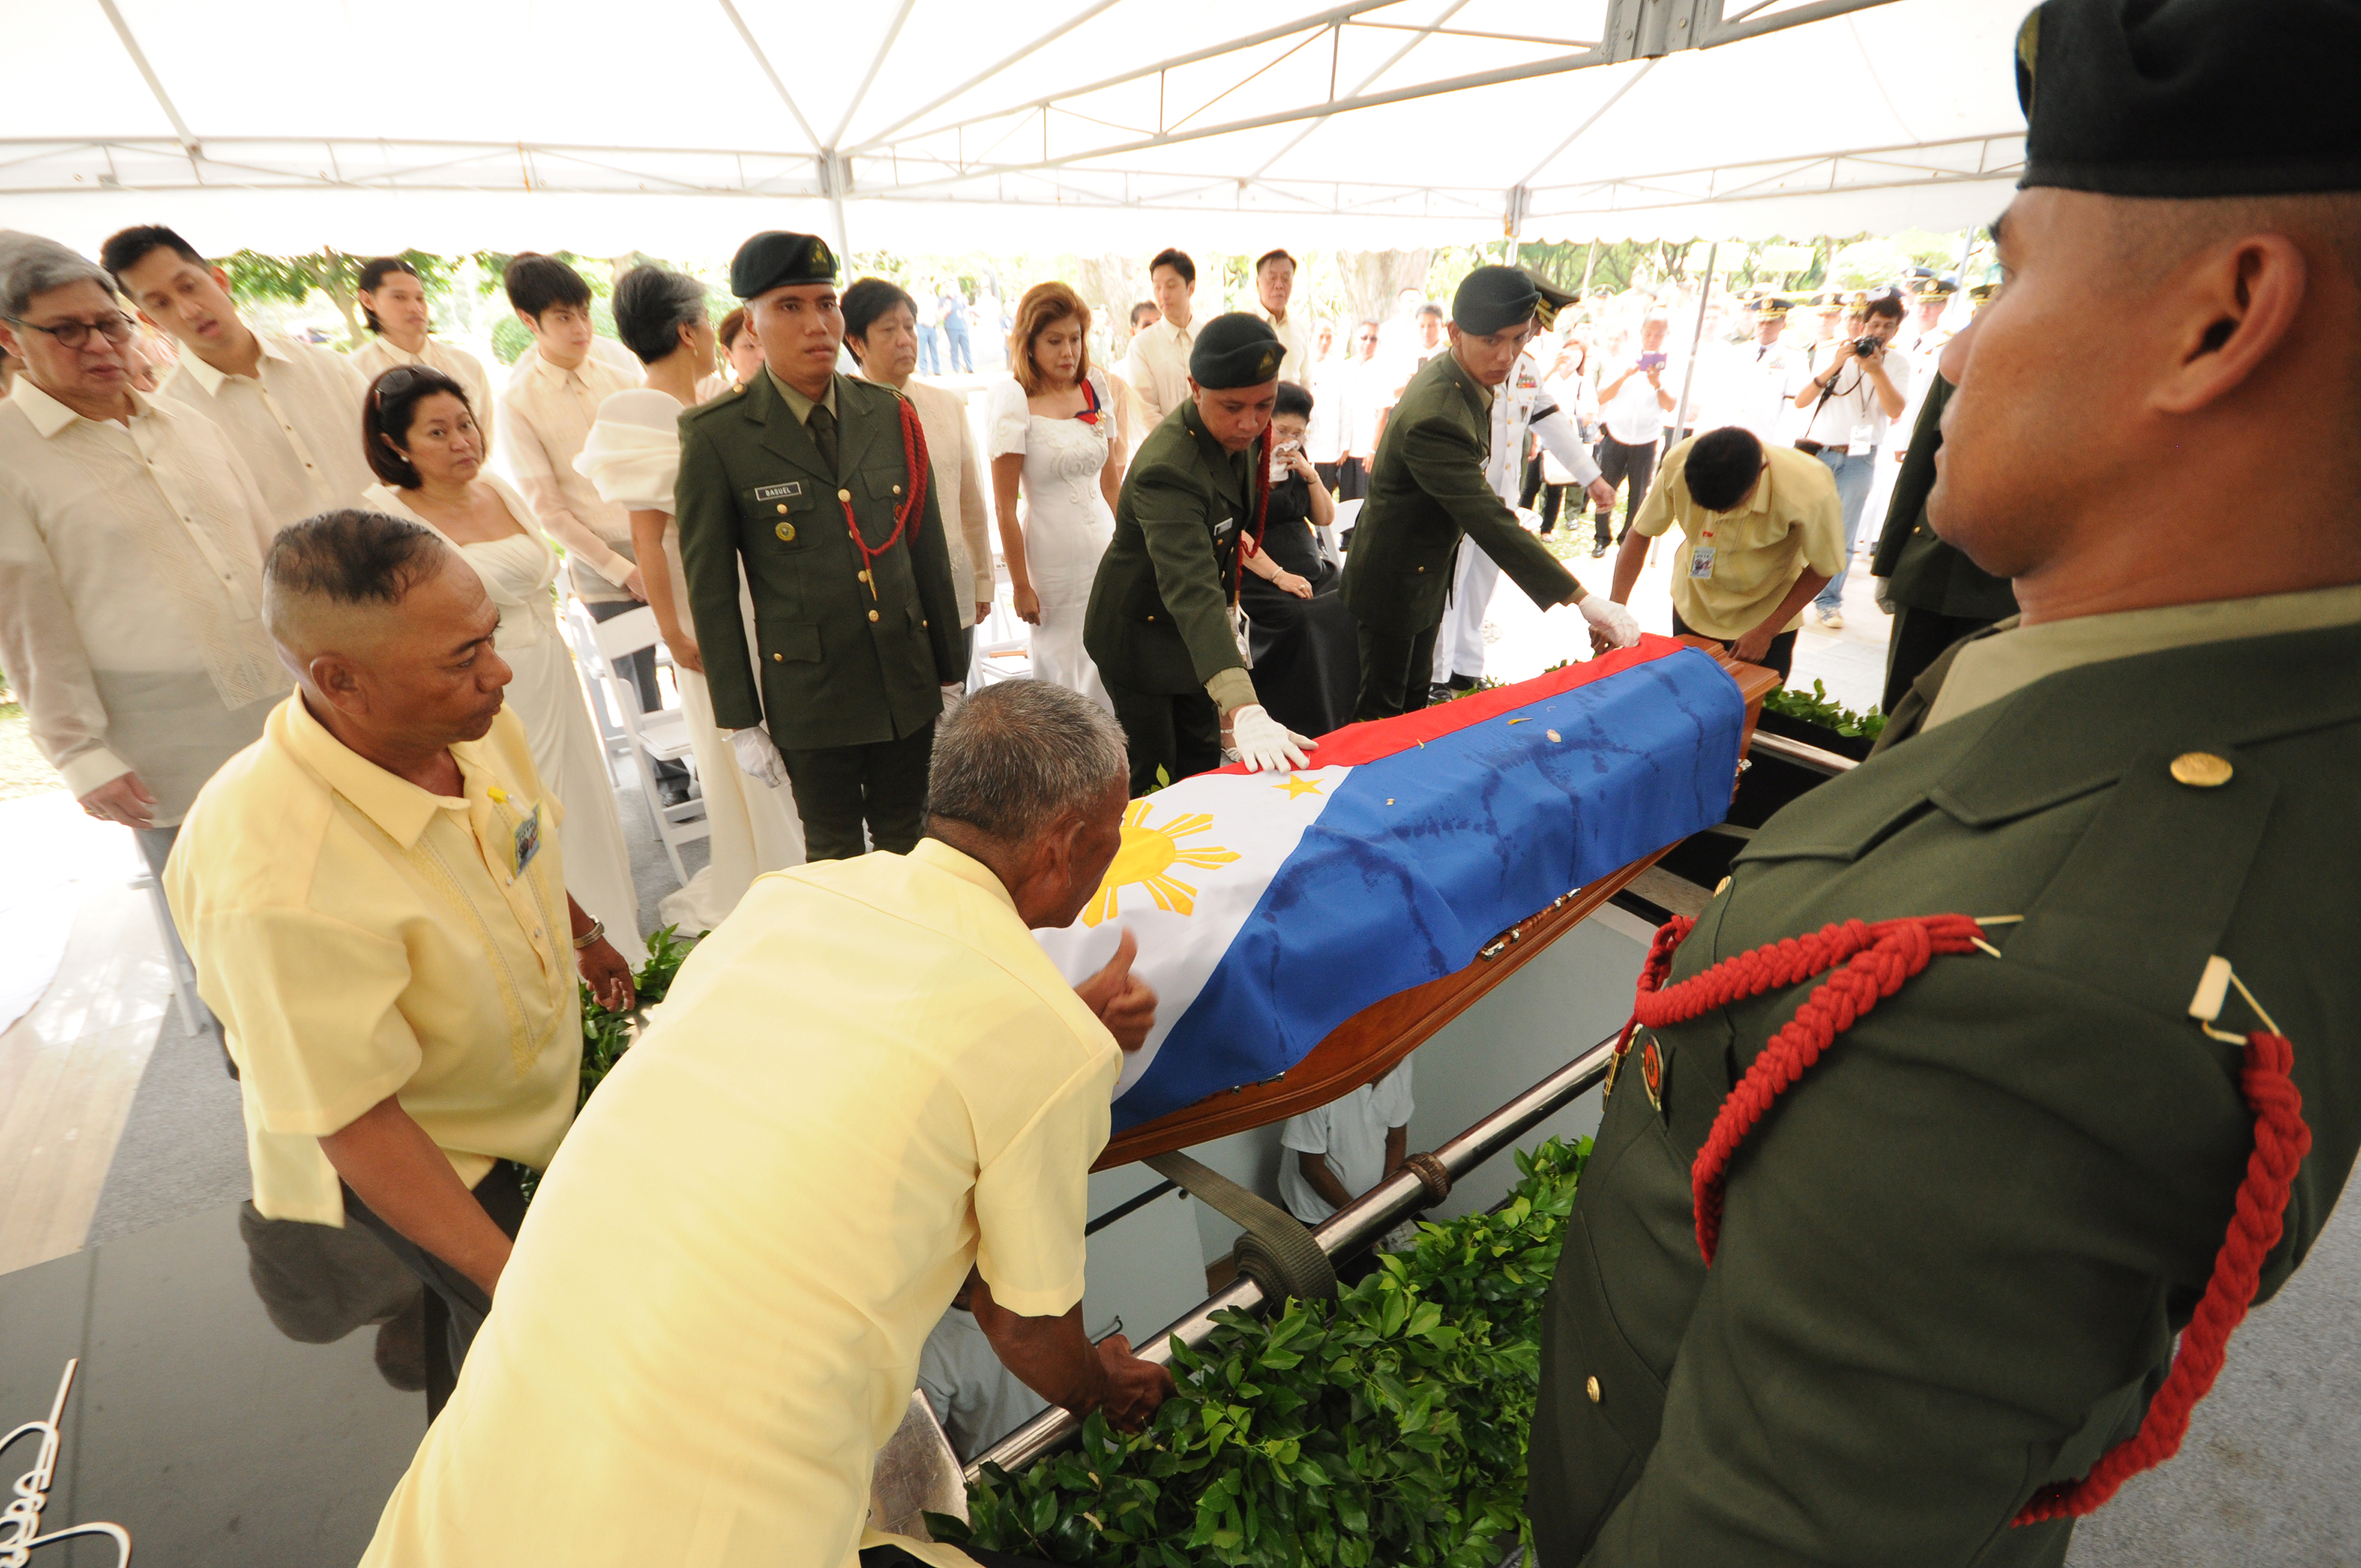 This photo taken on November 18, 20916 and released by the office of Governor Imee Marcos shows workers prepare to lower the coffin of the late dictator Ferdinand Marcos draped in national flag while members of the family (back) look on during the burial at the heroes' cemetery in Manila.   Ex-Philippine dictator Ferdinand Marcos was buried at the national heroes' cemetery in a secretive ceremony November 18, outraging opponents who said it whitewashed his brutal rule and tainted the famous 1986 "People Power" revolution that toppled him.   / AFP PHOTO / Office of Governor Imee Marcos / HO